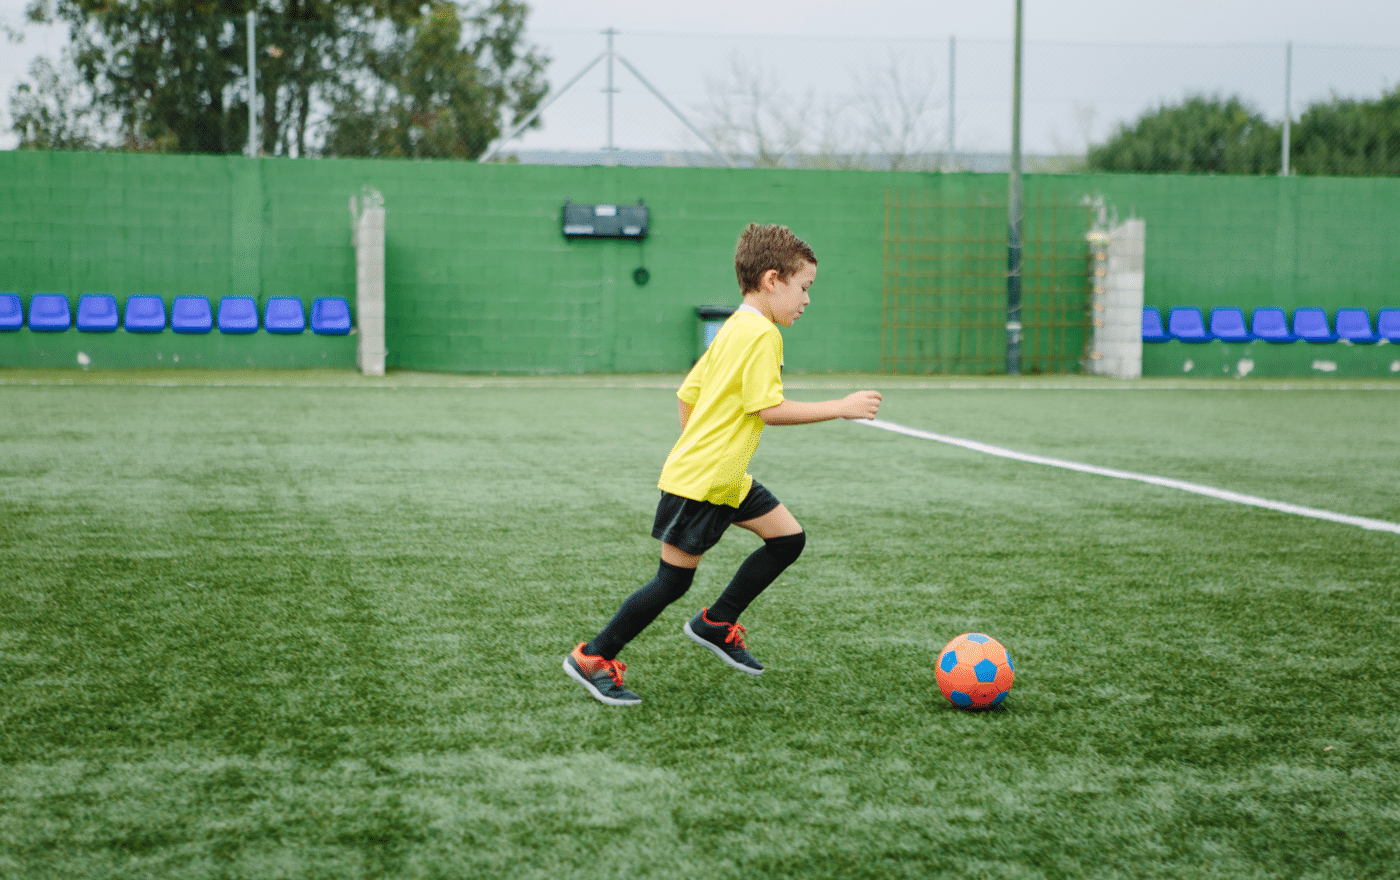 Little boy doing some football training and coaching on an astroturf pitch.